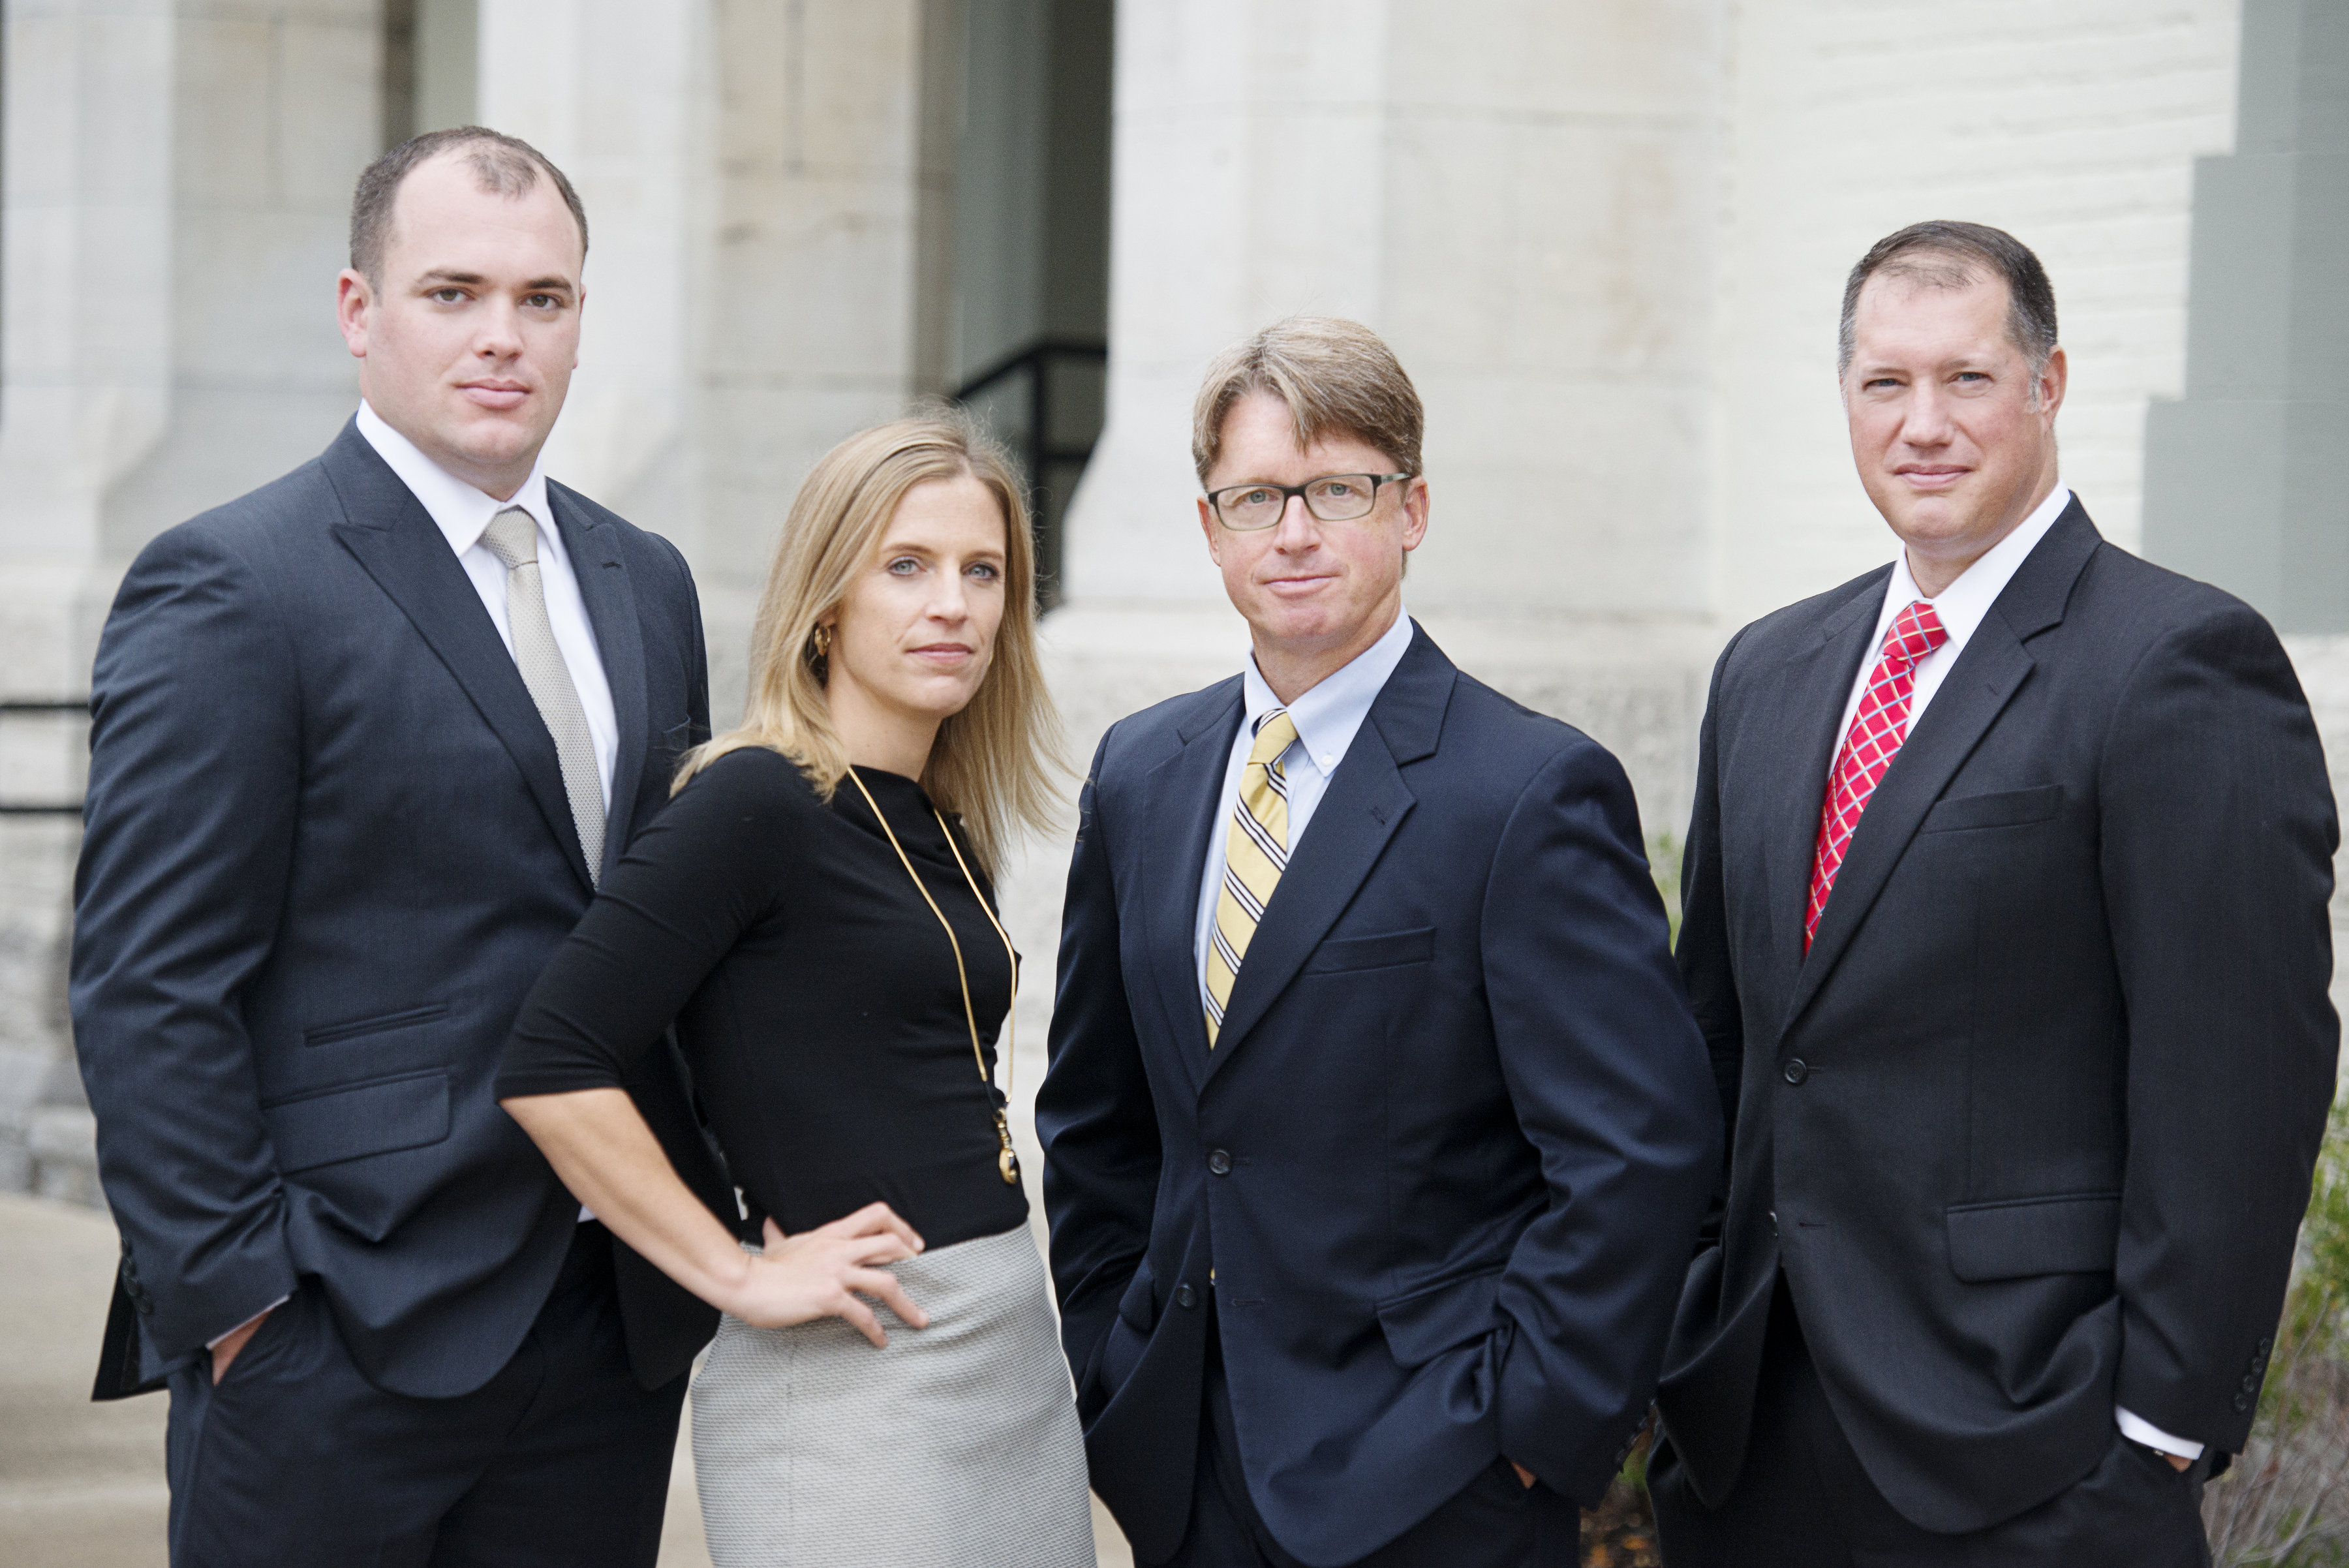 Ziff Law attorneys, from left, Mike Brown, Christina Sonsire, Jim Reed, and ZiffLaw Attorney.